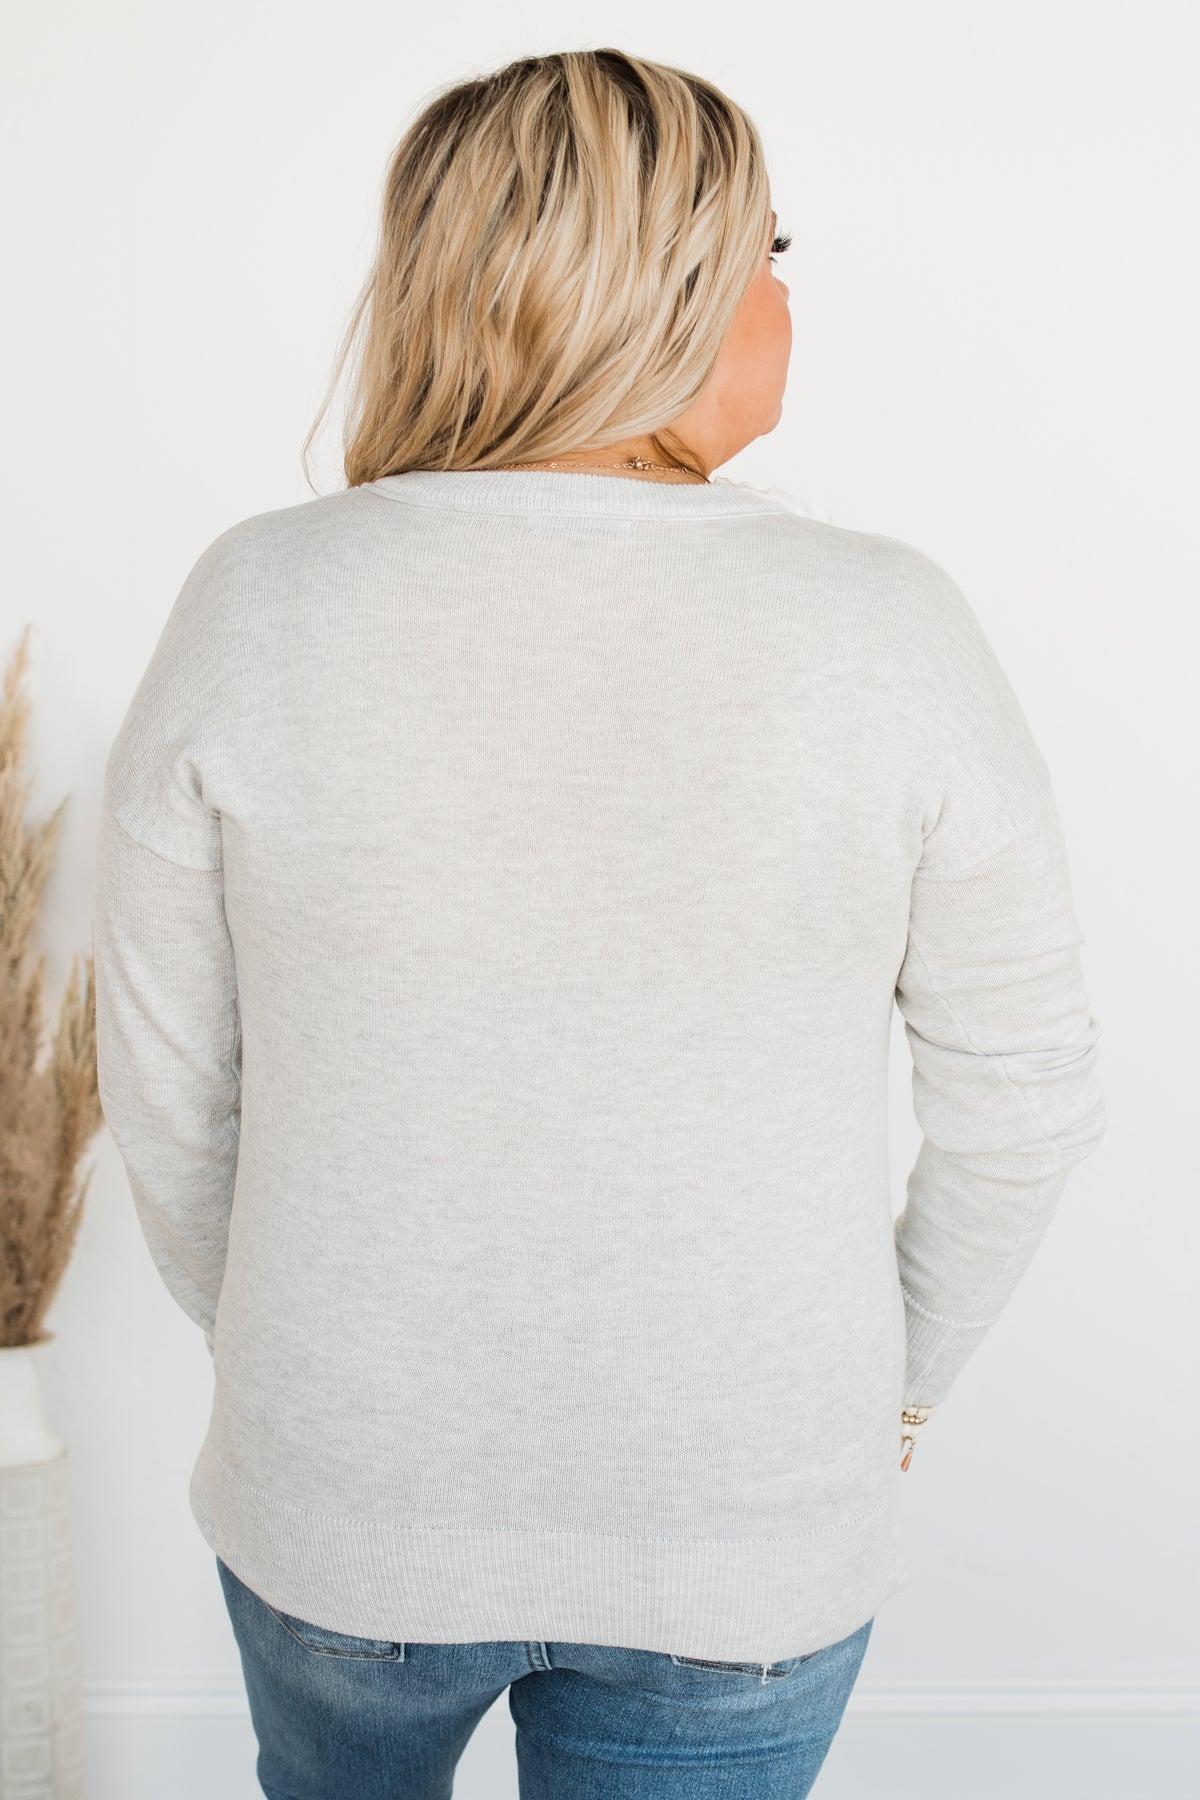 No Worries Here Knit Sweater- Light Grey